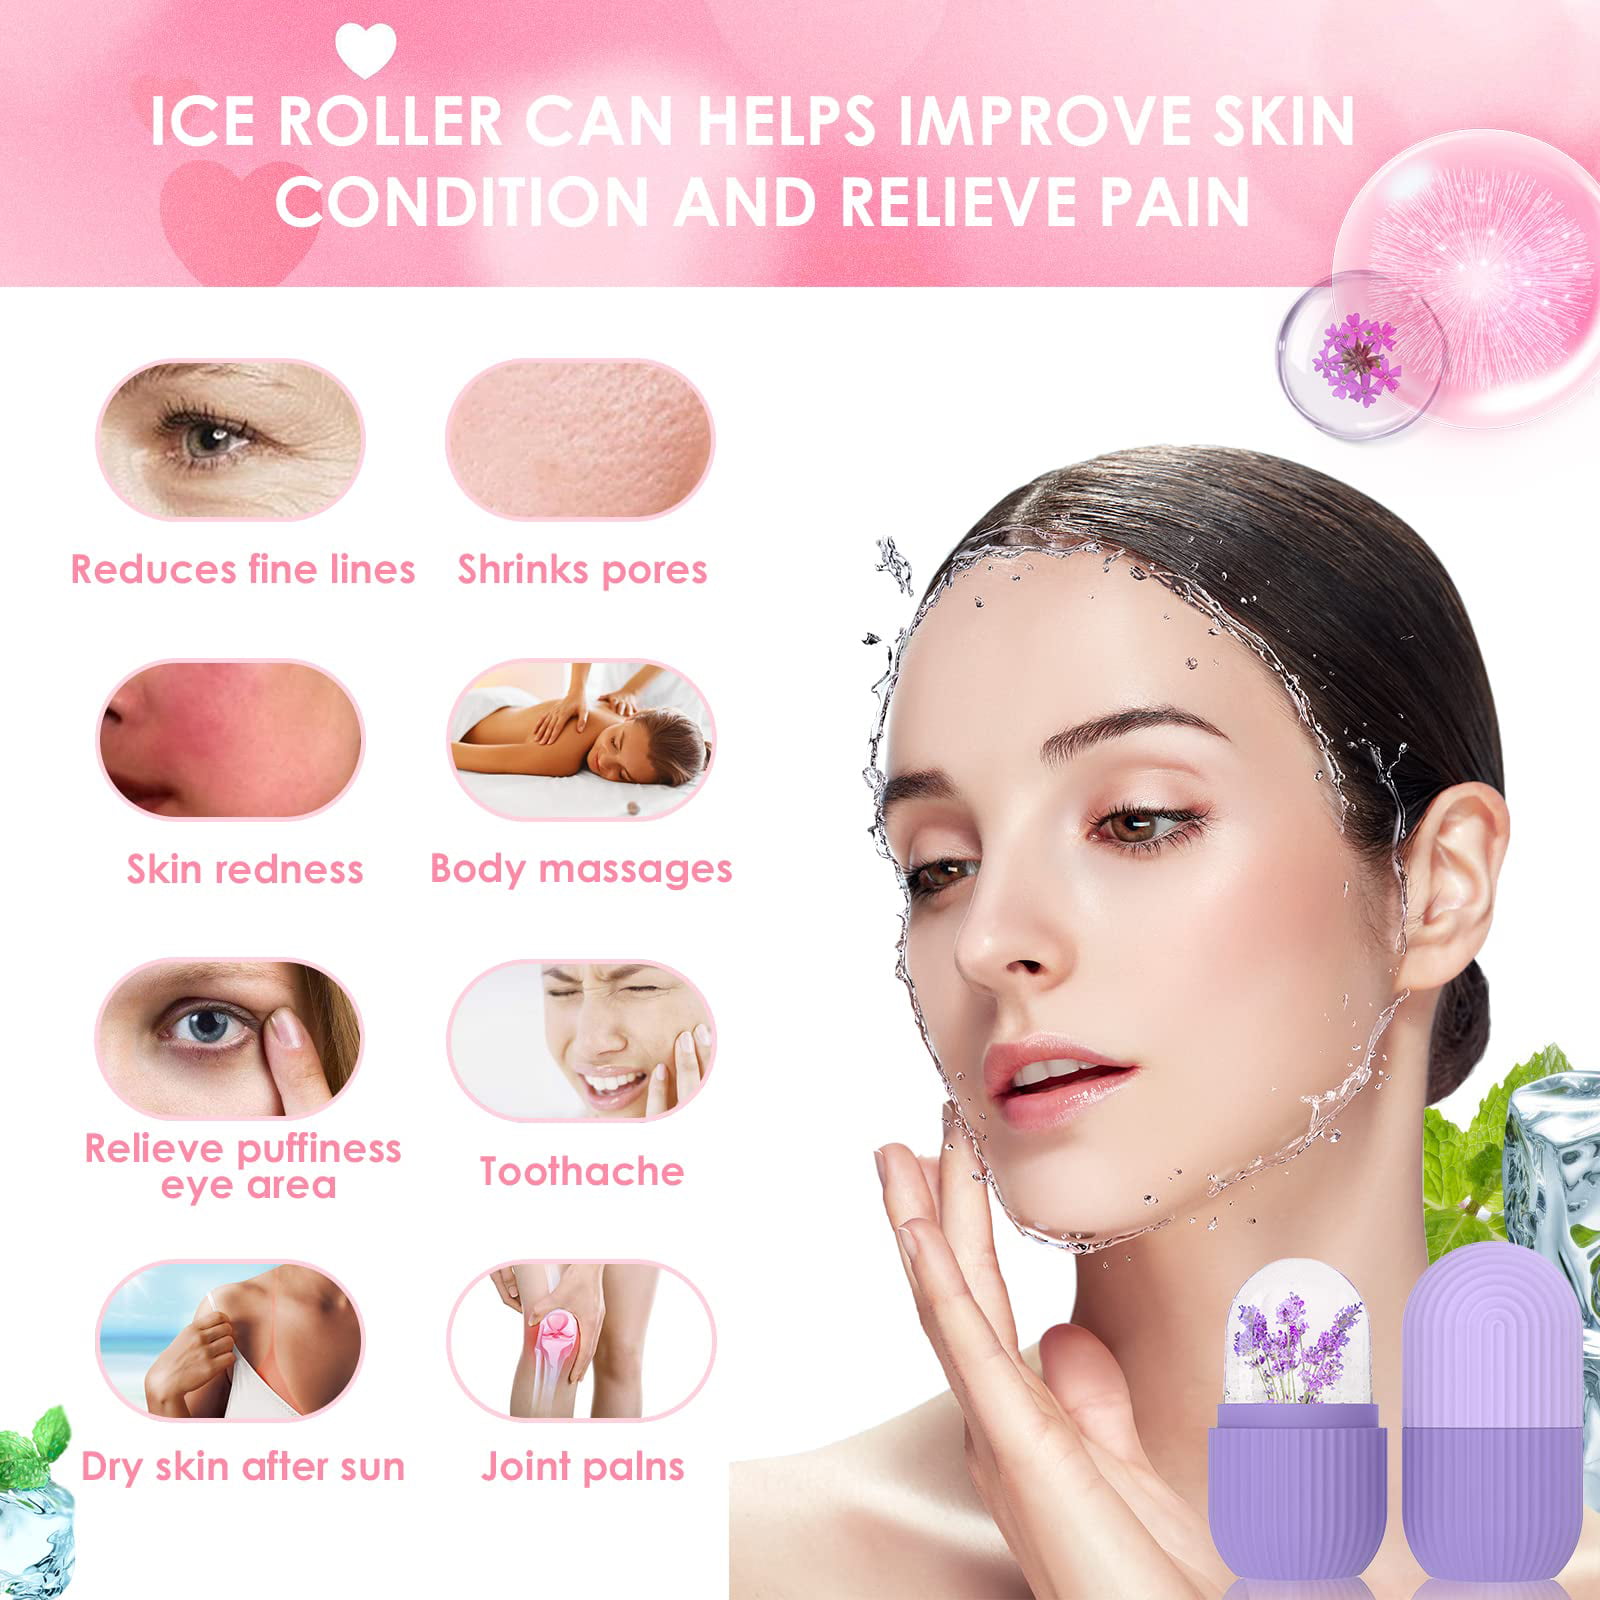 Skin Care Beauty Lifting Contouring Tool Silicone Ice Cube Trays Ice Globe  Ice Balls Face Massager Facial Roller Reduce Acne J5G5 